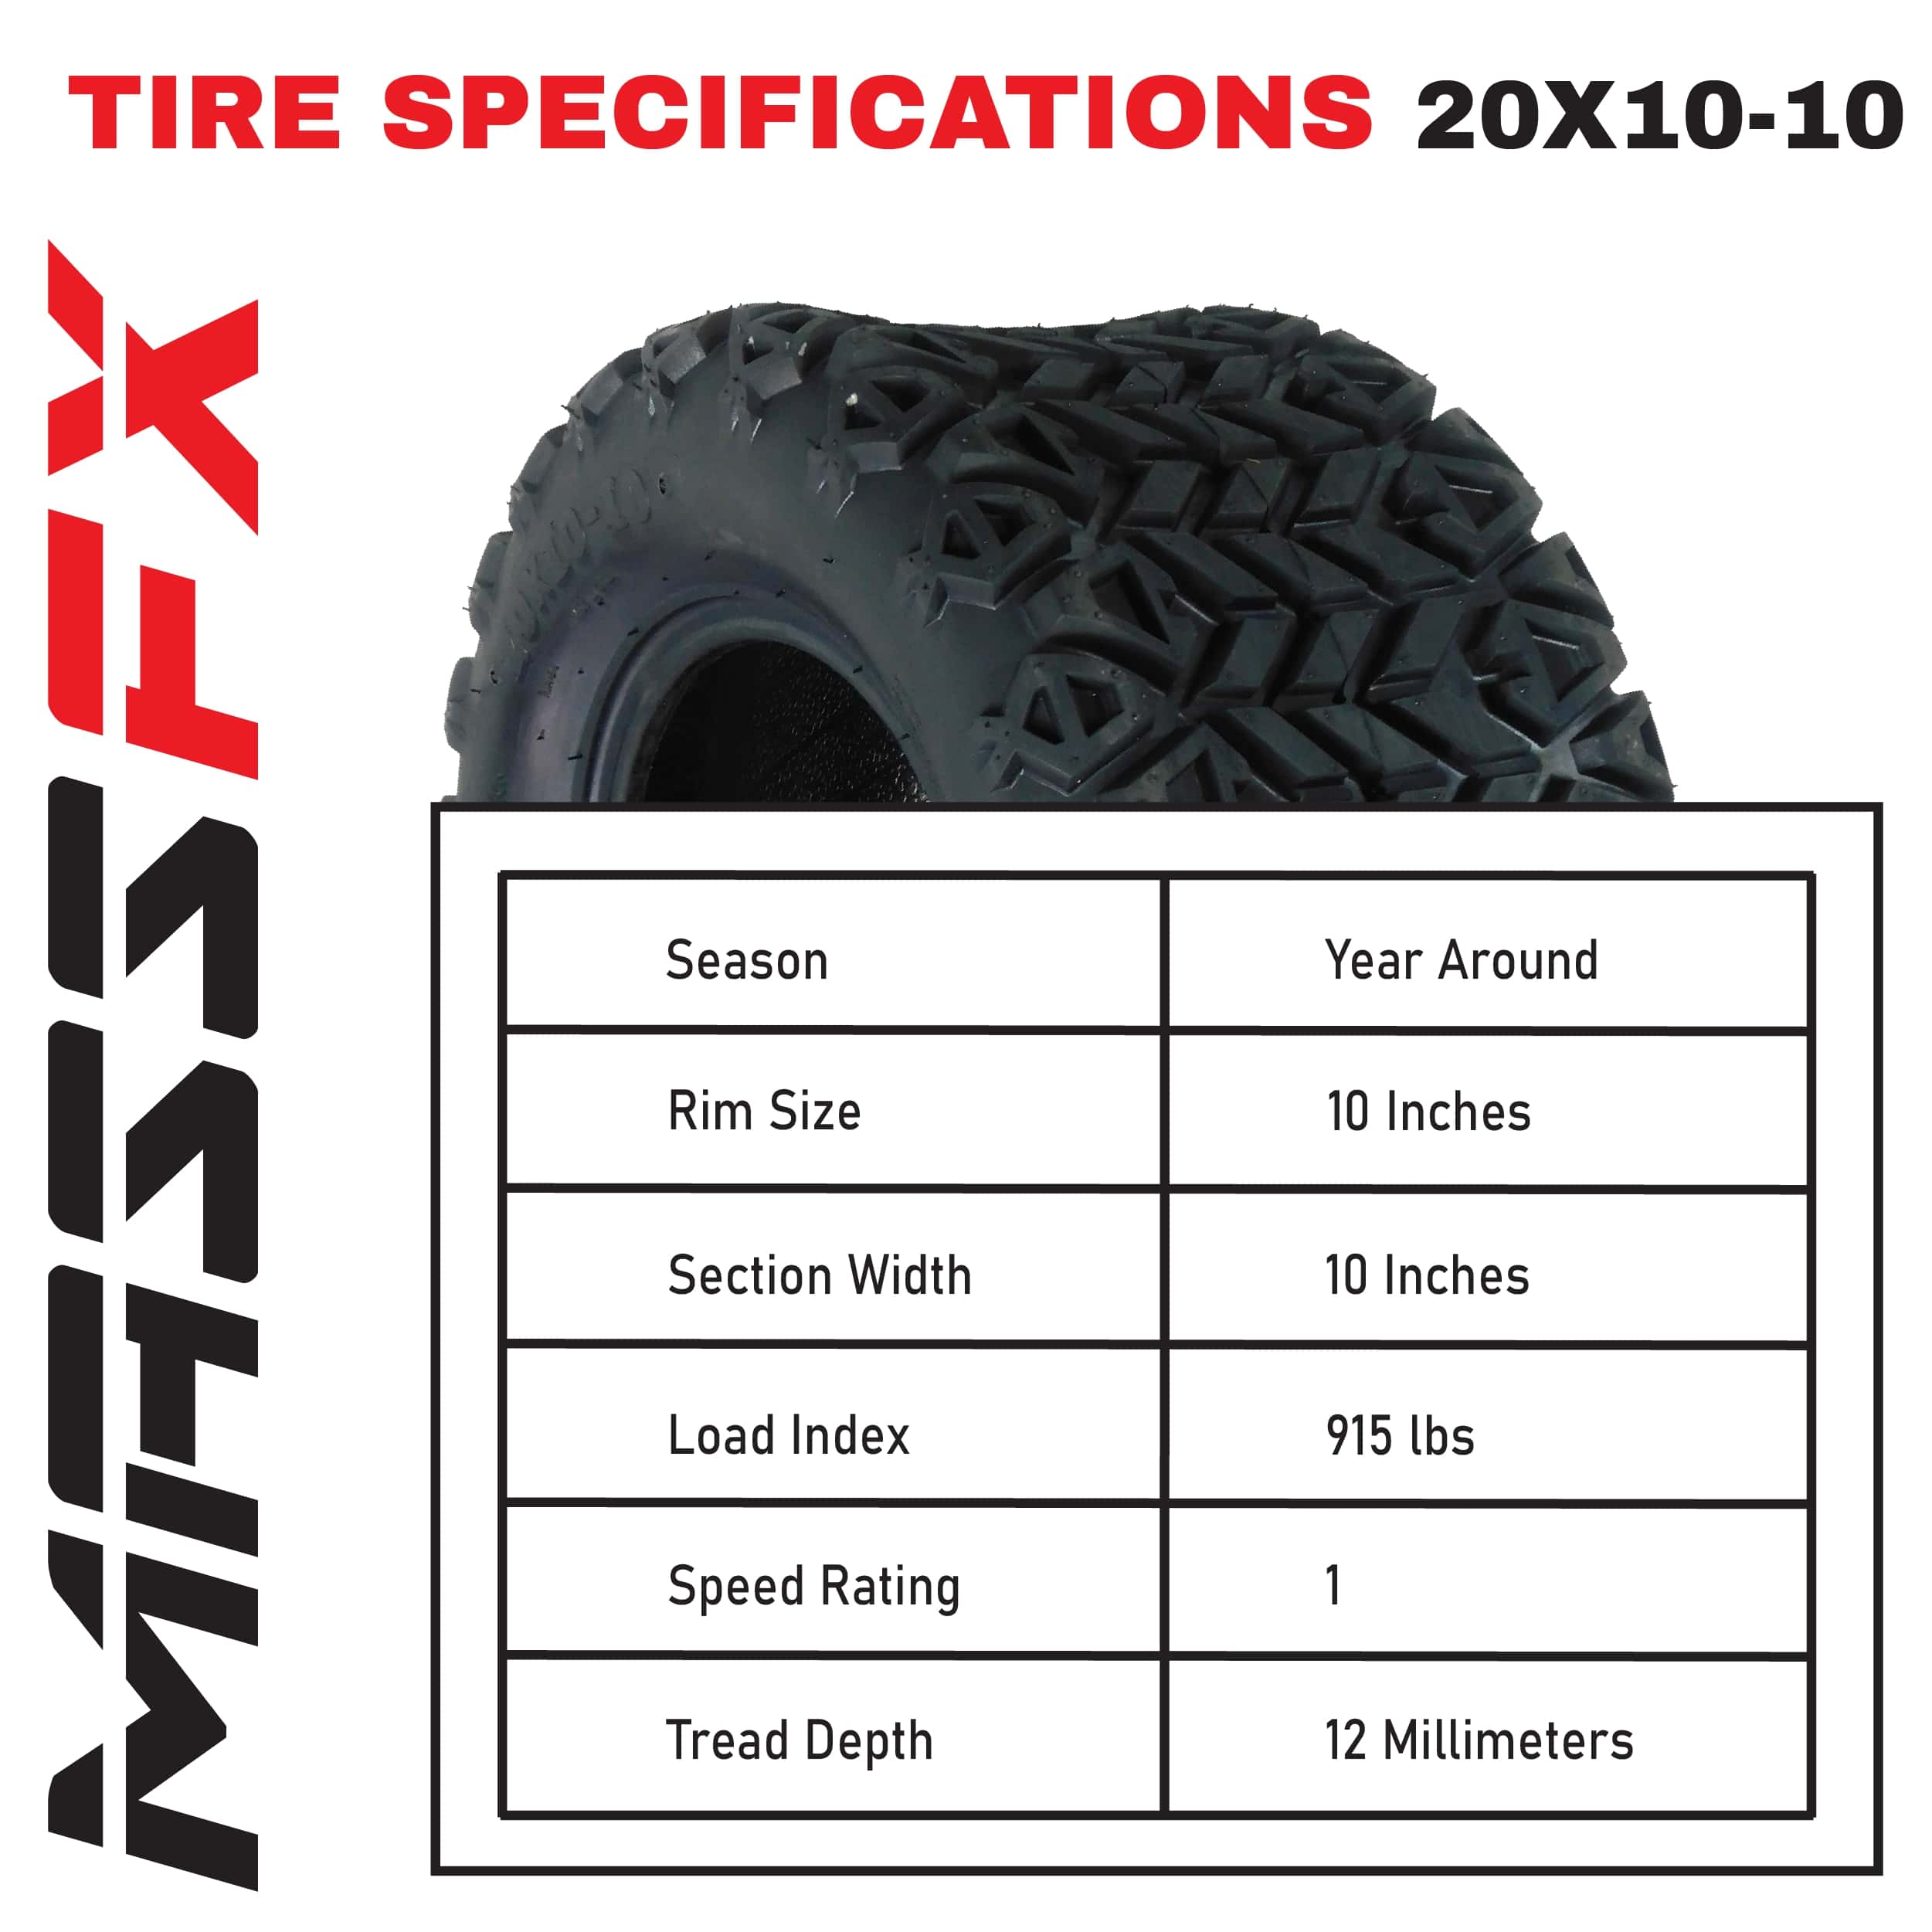 MASSFX SL201010(x2) 4 PLY Golf Cart Turf Tires 20x10-10, Set of two (2)Tires